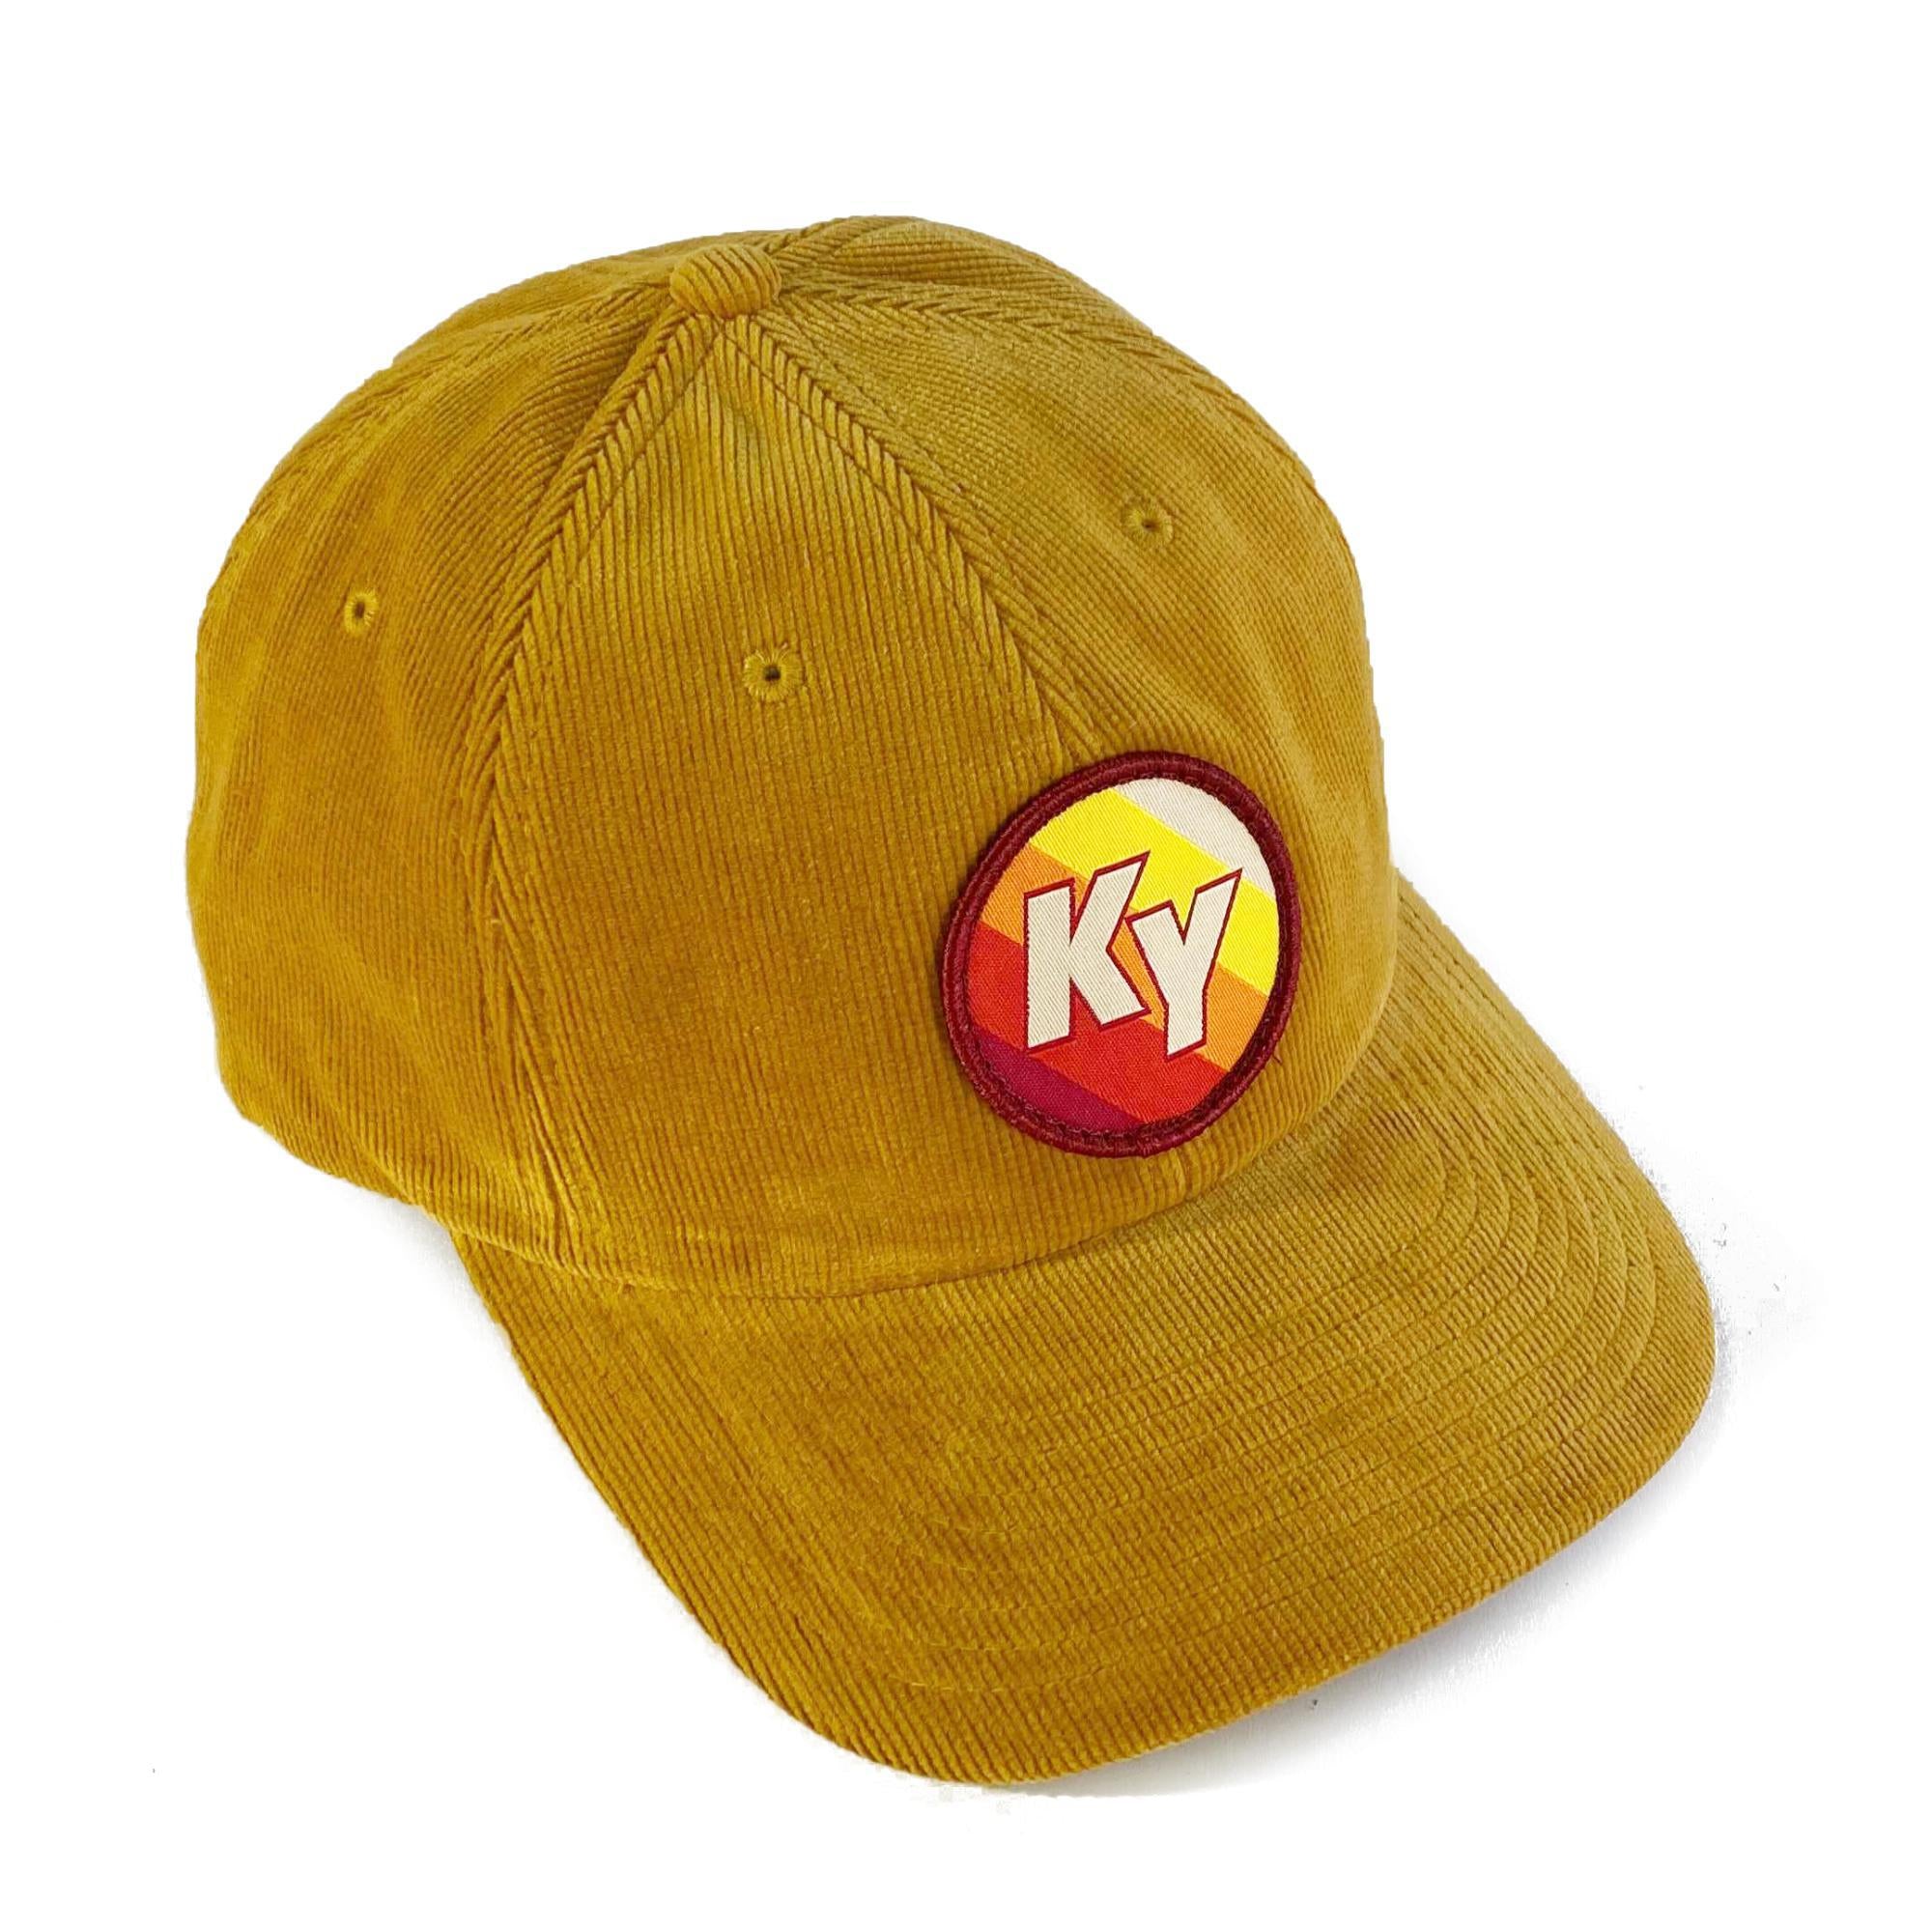 Ky Corduroy Dad Hat (Yellow)-Hat-KY for KY Store